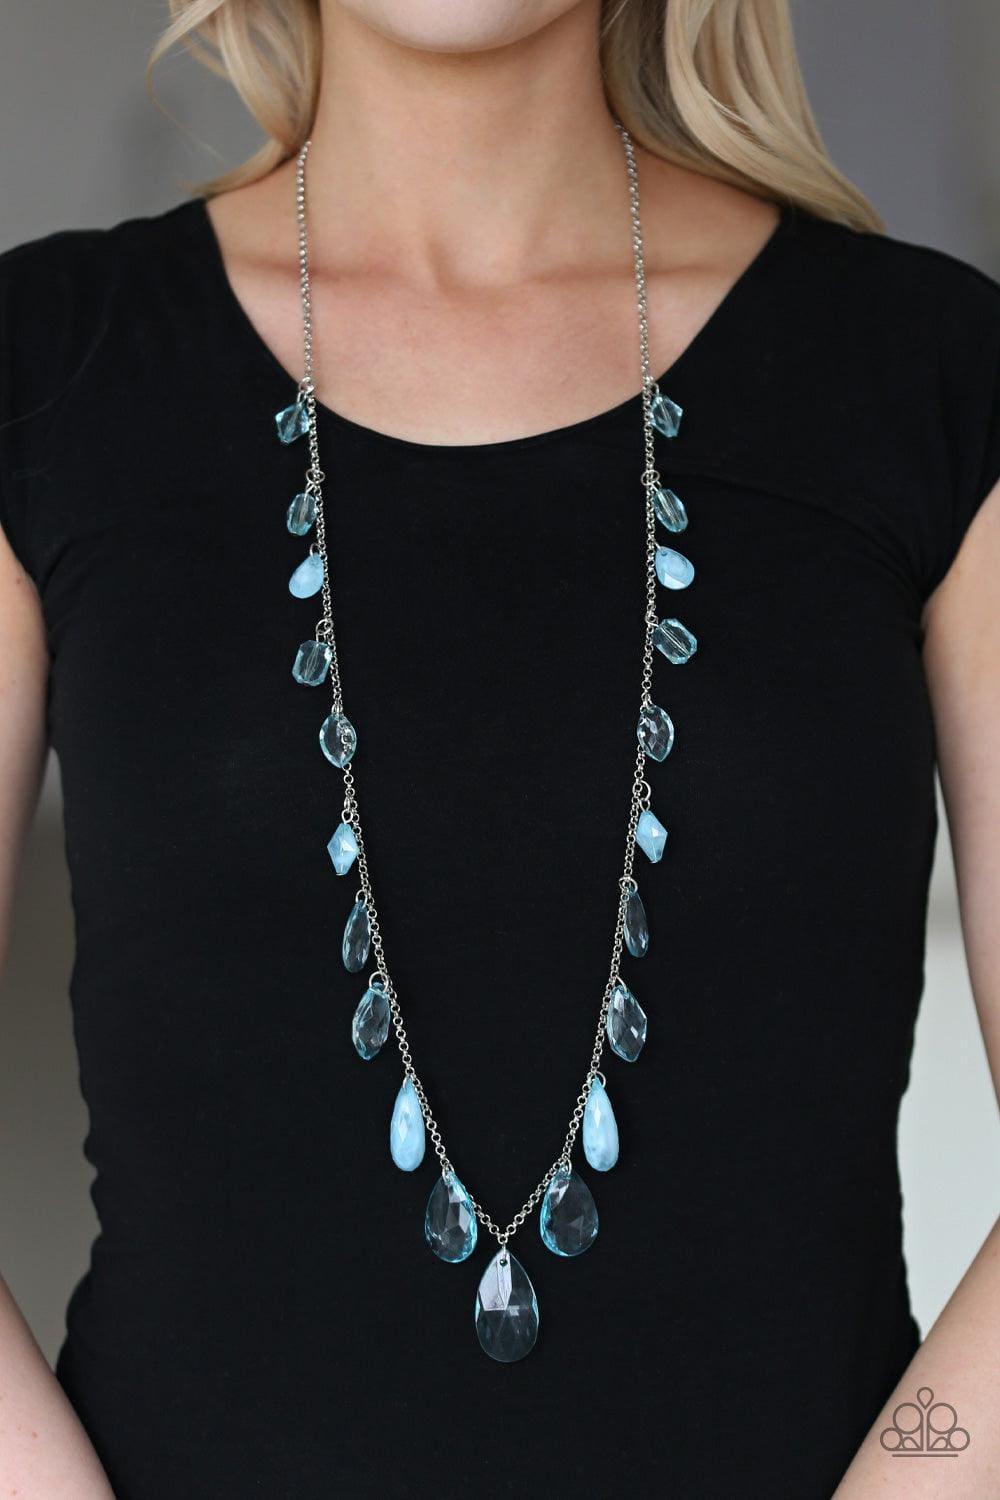 Paparazzi Accessories - Glow And Steady Wins The Race - Blue Necklace - Bling by JessieK